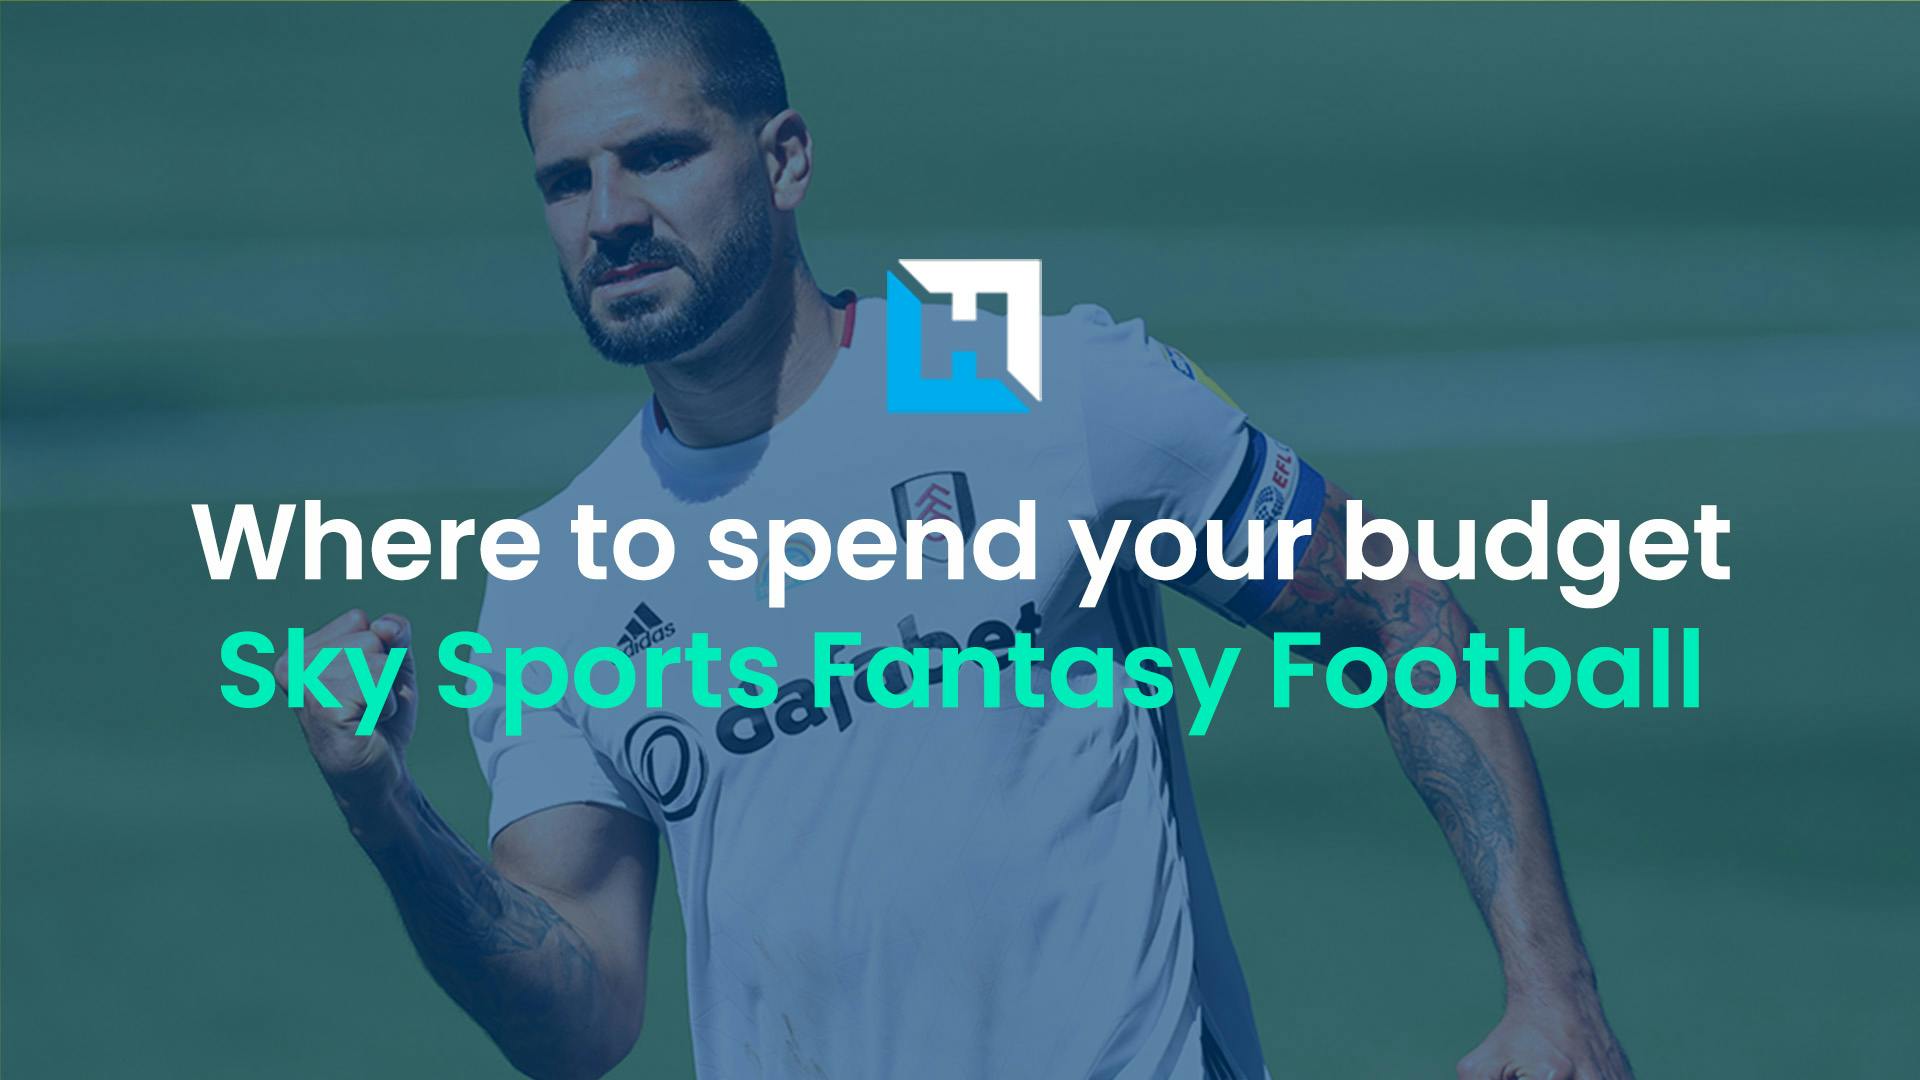 Sky Sports Fantasy Football: Which positions should you spend your Sky budget on to get the best return on investment?